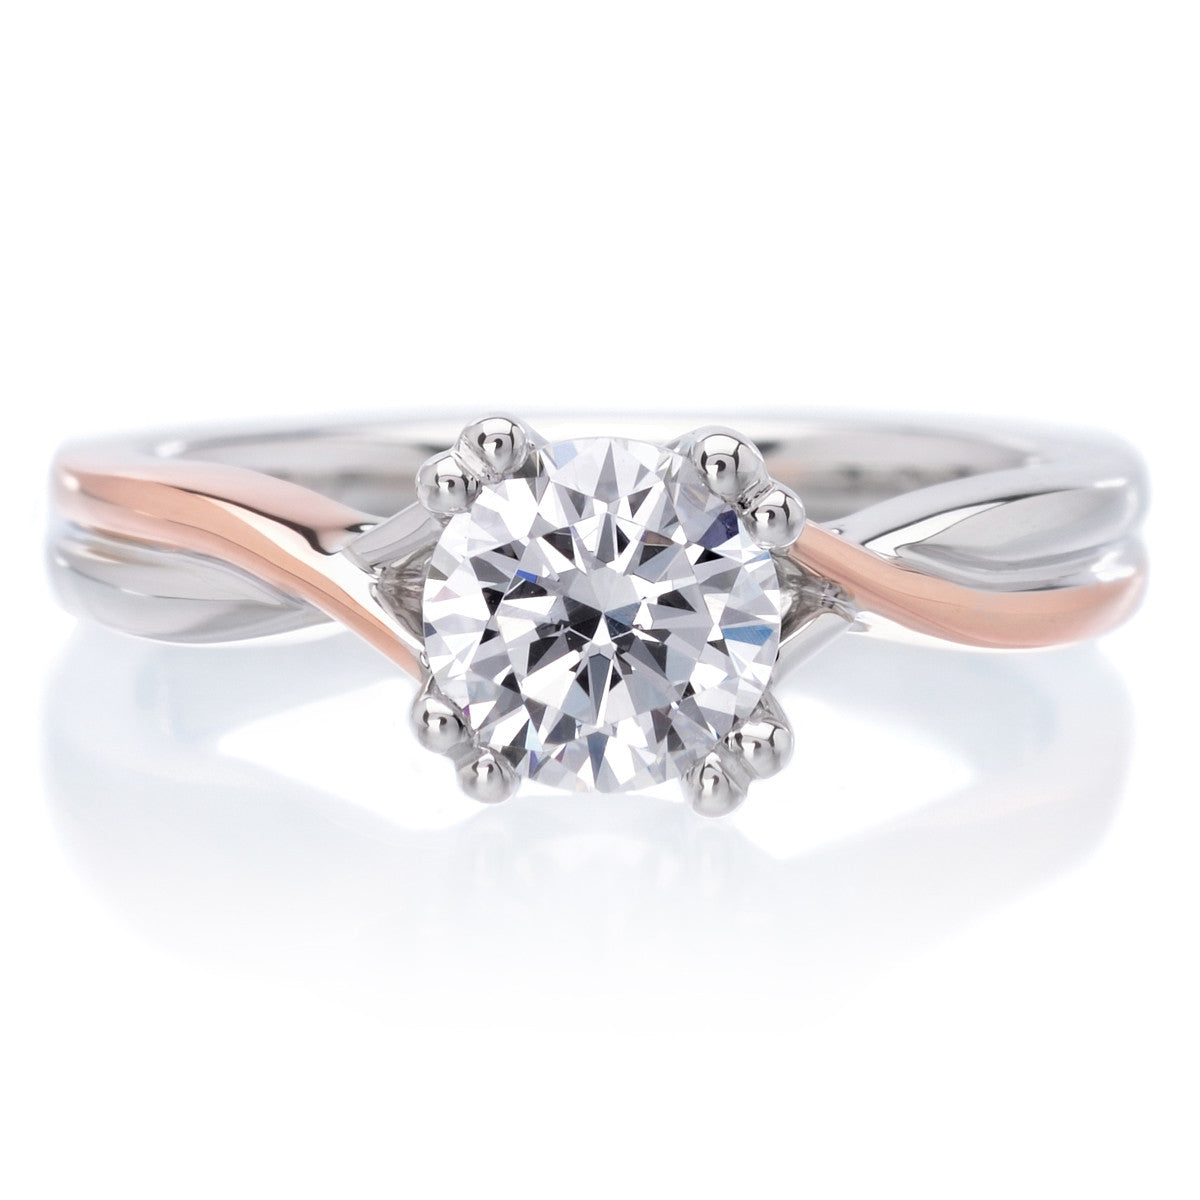 18K White and Rose Gold Solitude Engagement Ring